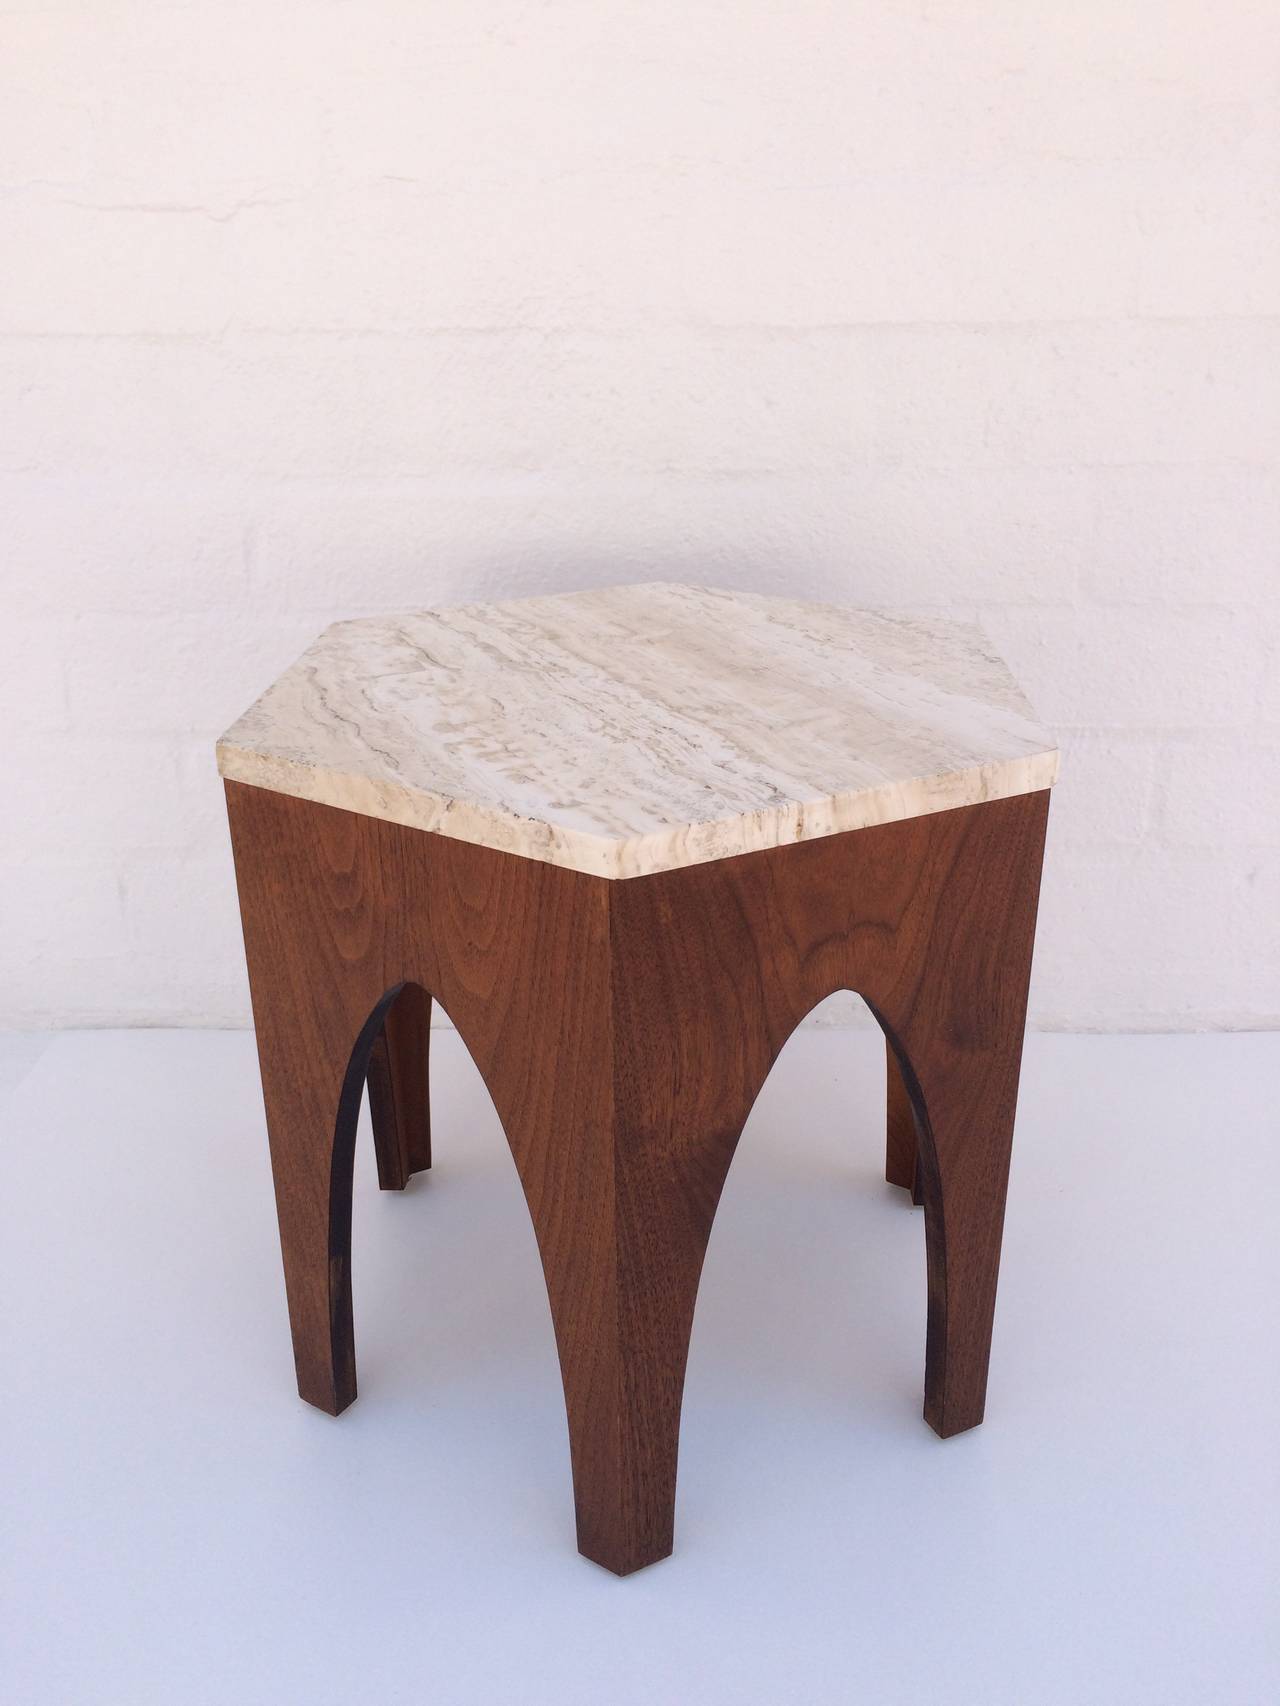 A hexagon occasional table designed by Harvey Probber.
This attractive table consist of a walnut base and a polished travertine top.
circa 1950s.